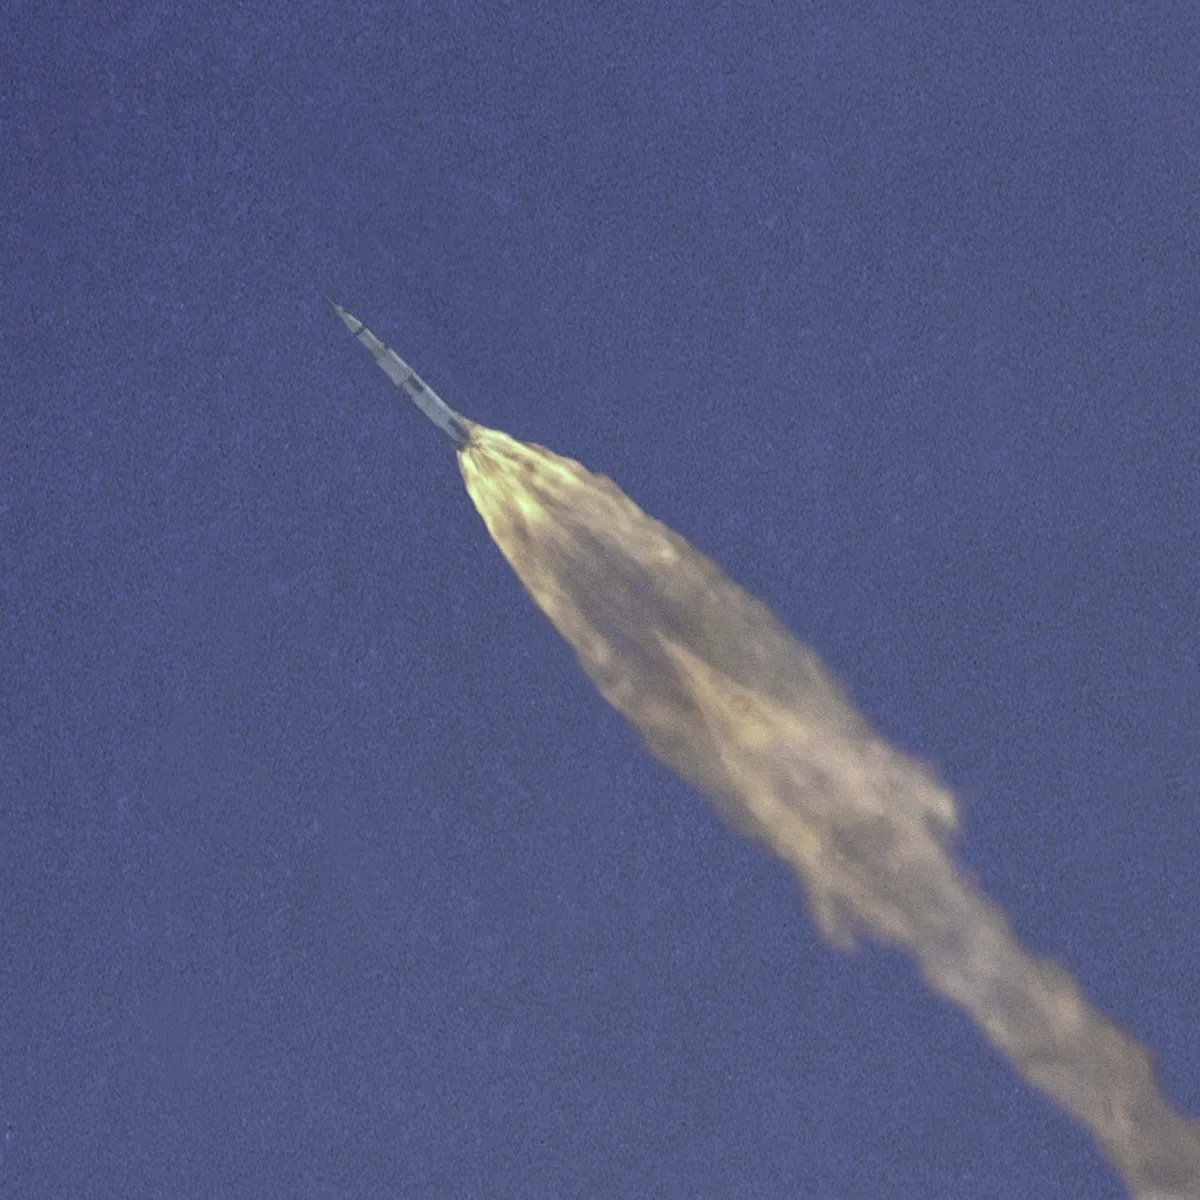 Apollo 10 launches from Kennedy Space Center, 18 May 1969. Credit: NASA